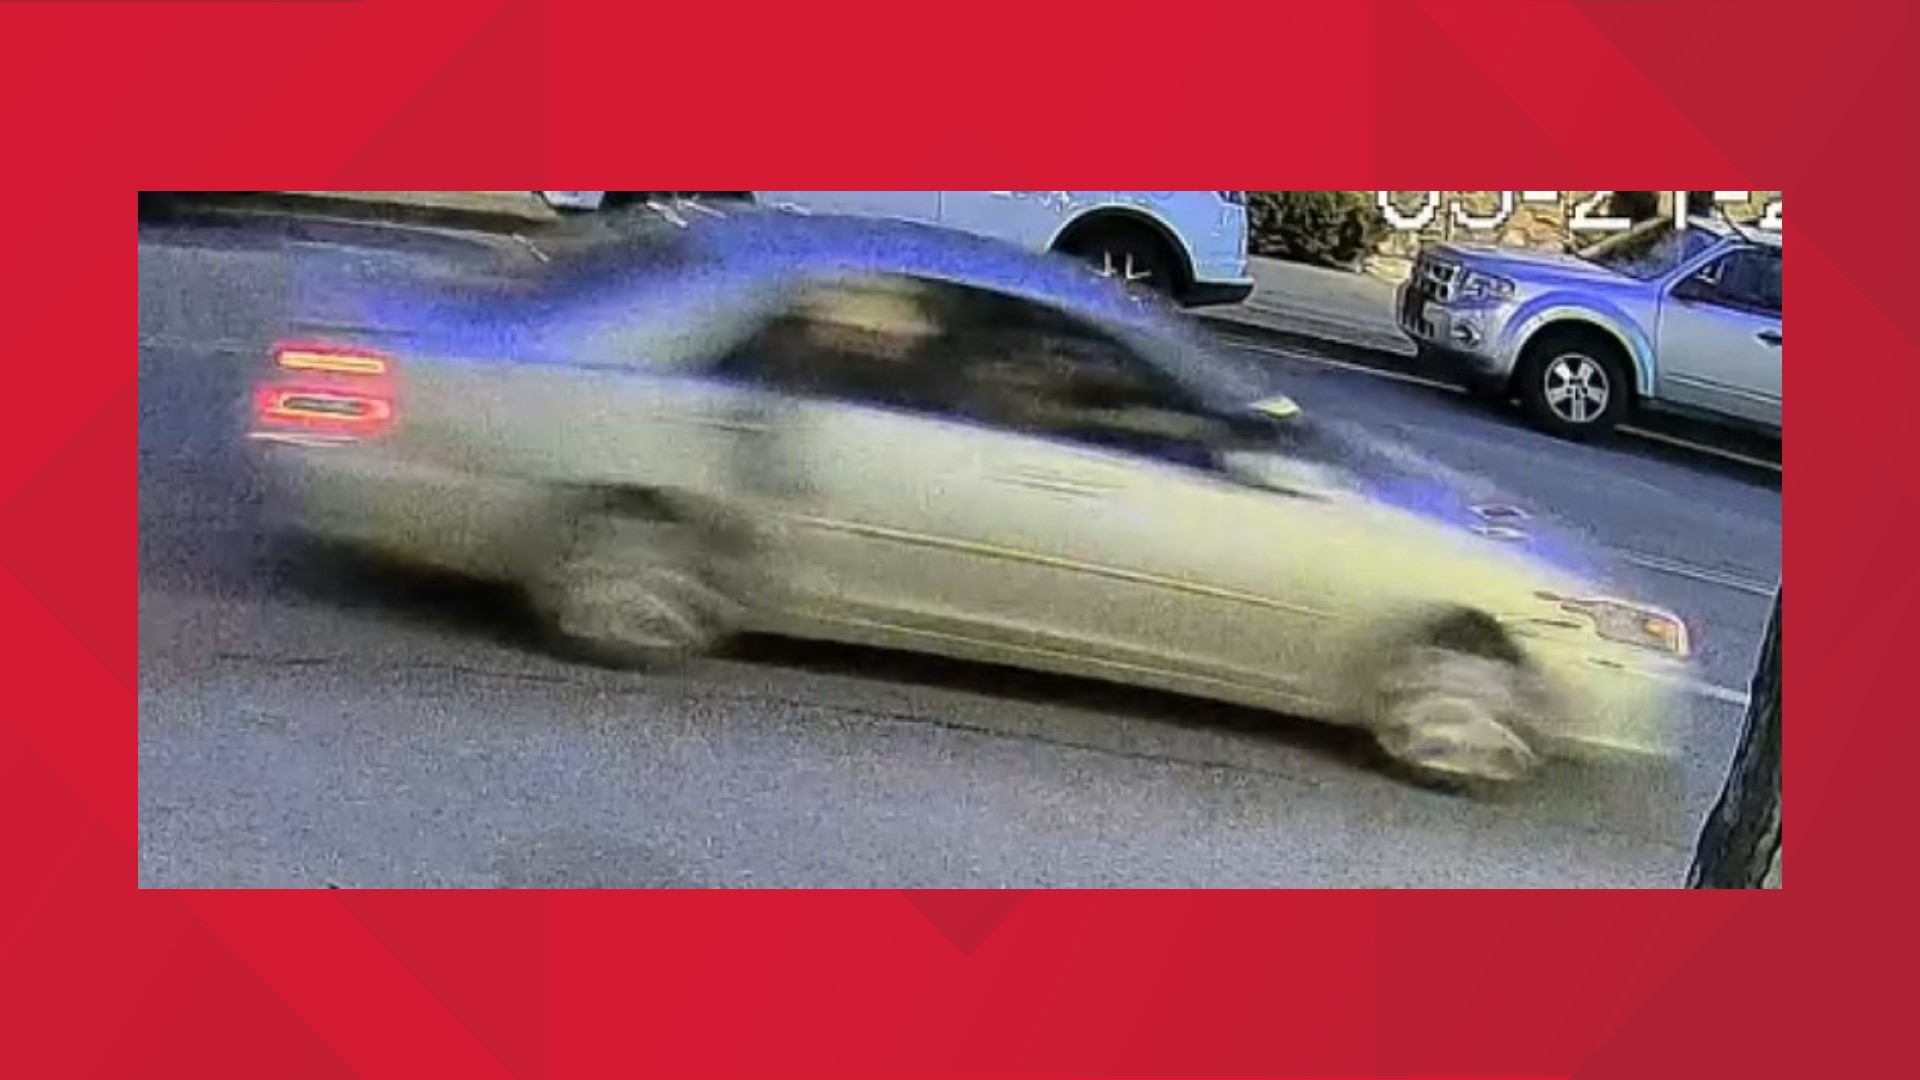 Detectives are also trying to identify a silver passenger car that was in the area at the time of the incident.